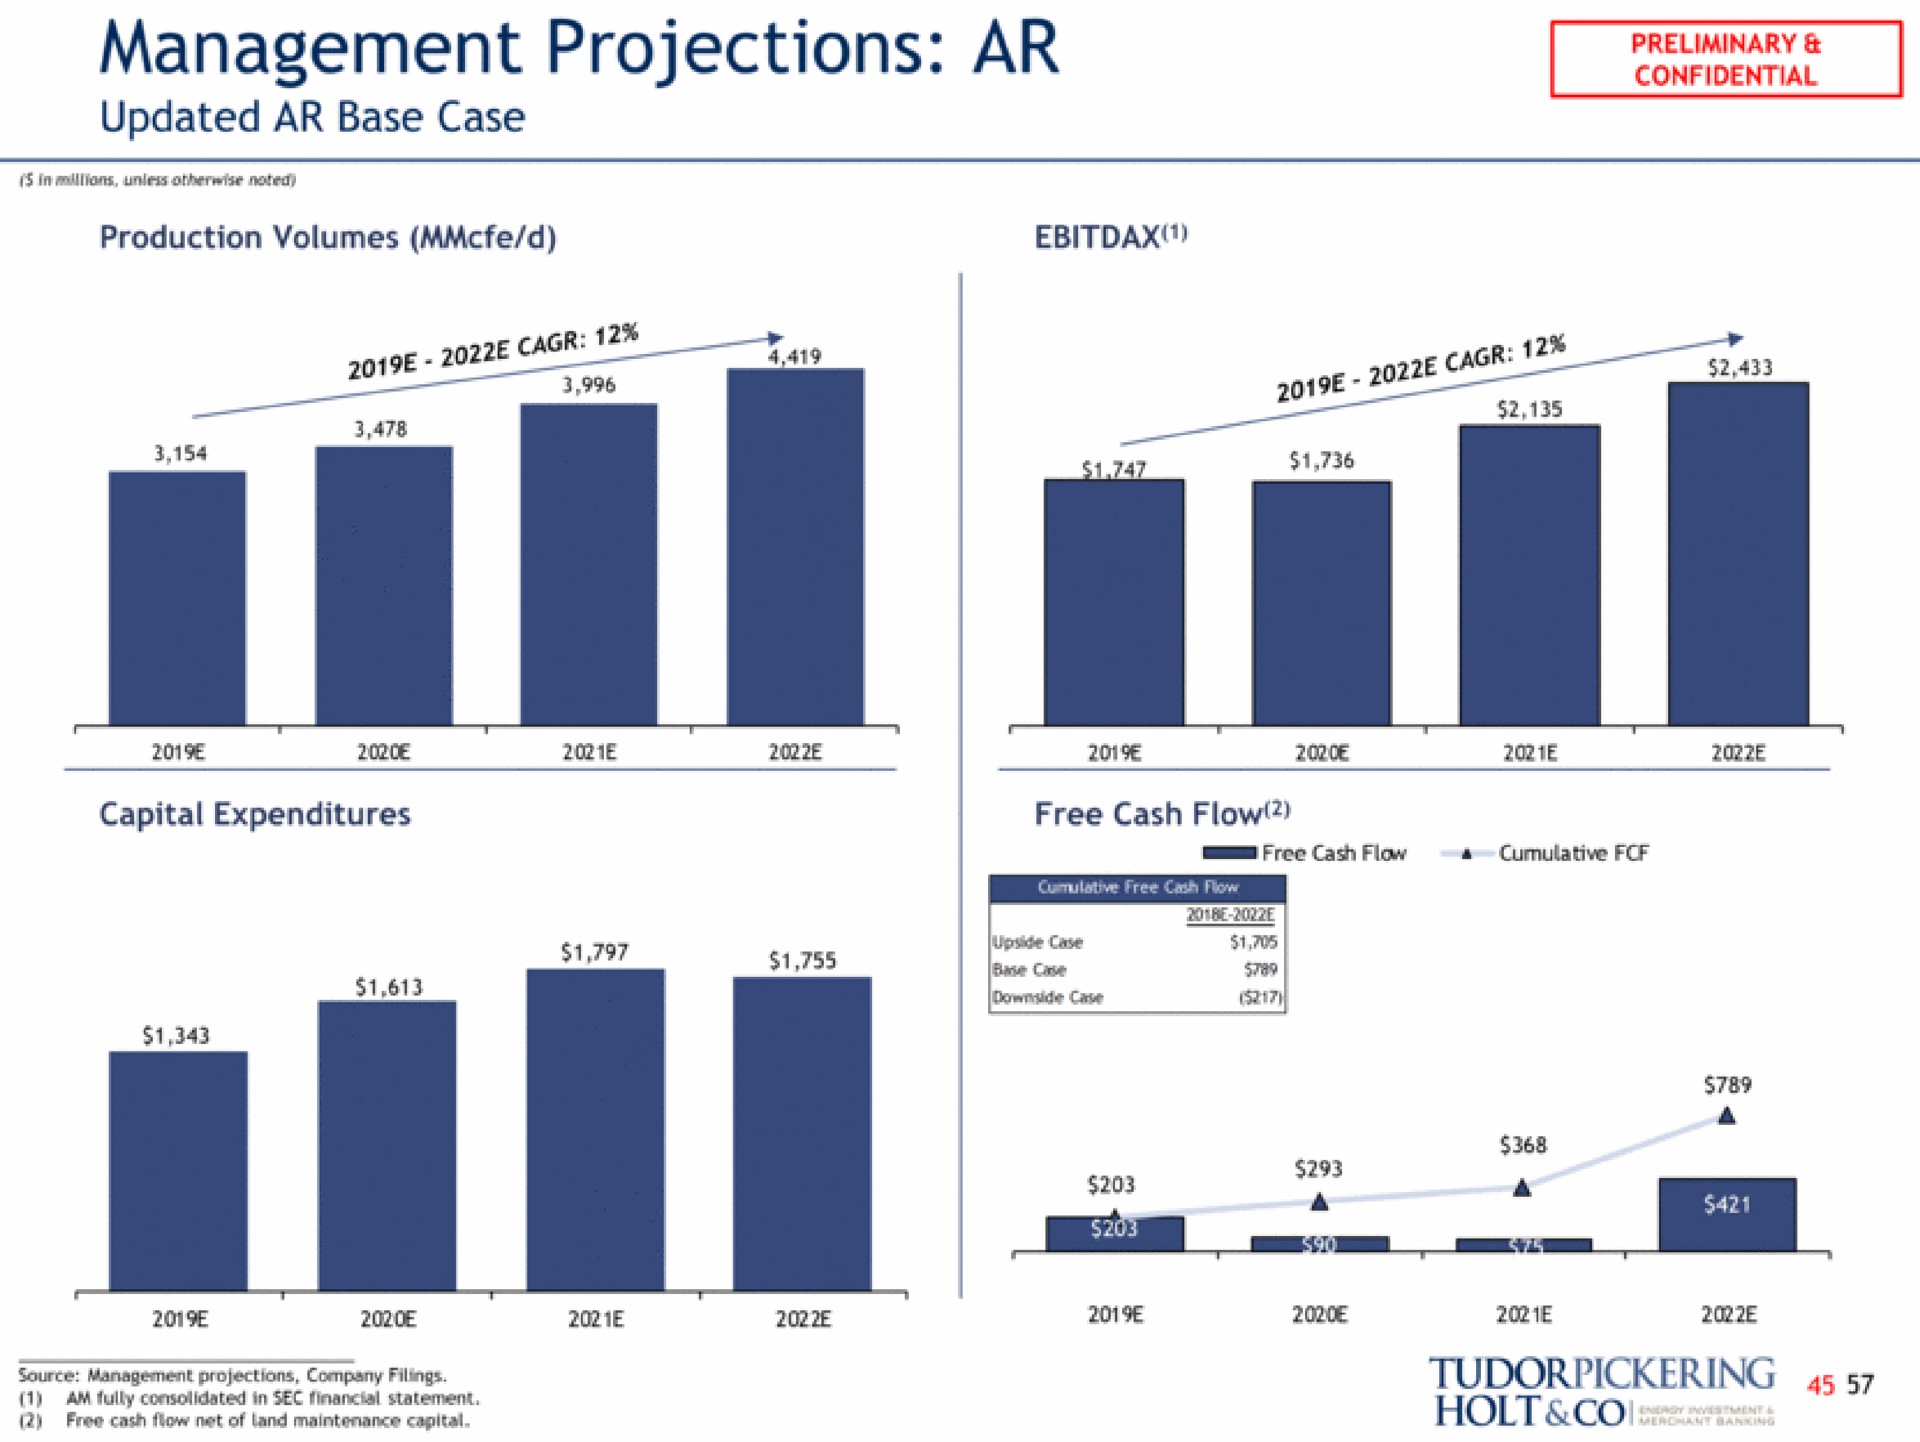 management projections updated base case preliminary confidential holt coo | Tudor, Pickering, Holt & Co